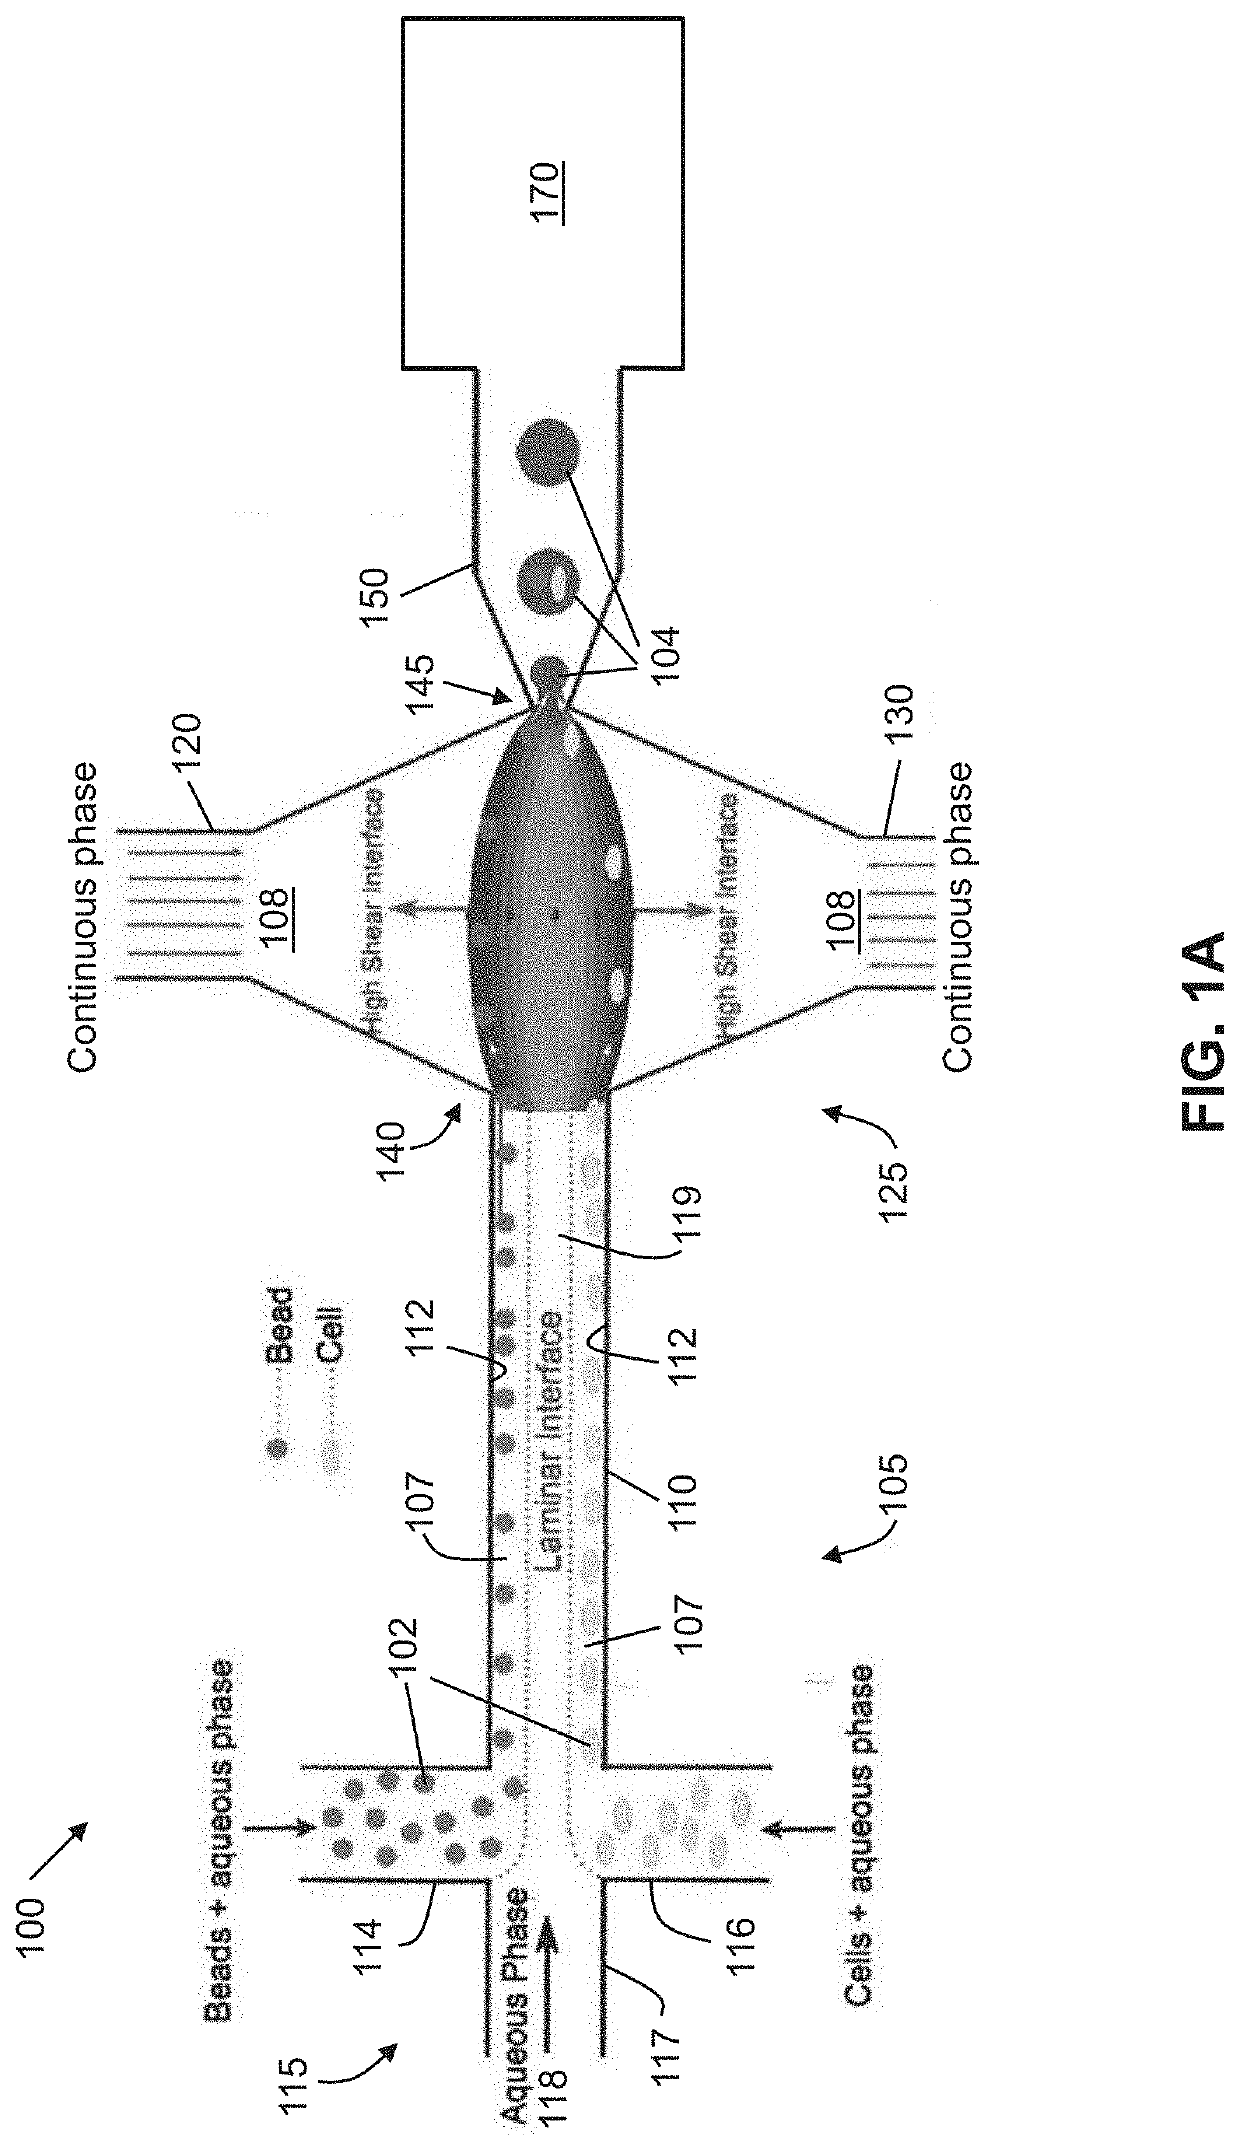 High-efficiency particle encapsulation in droplets with particle spacing and downstream droplet sorting